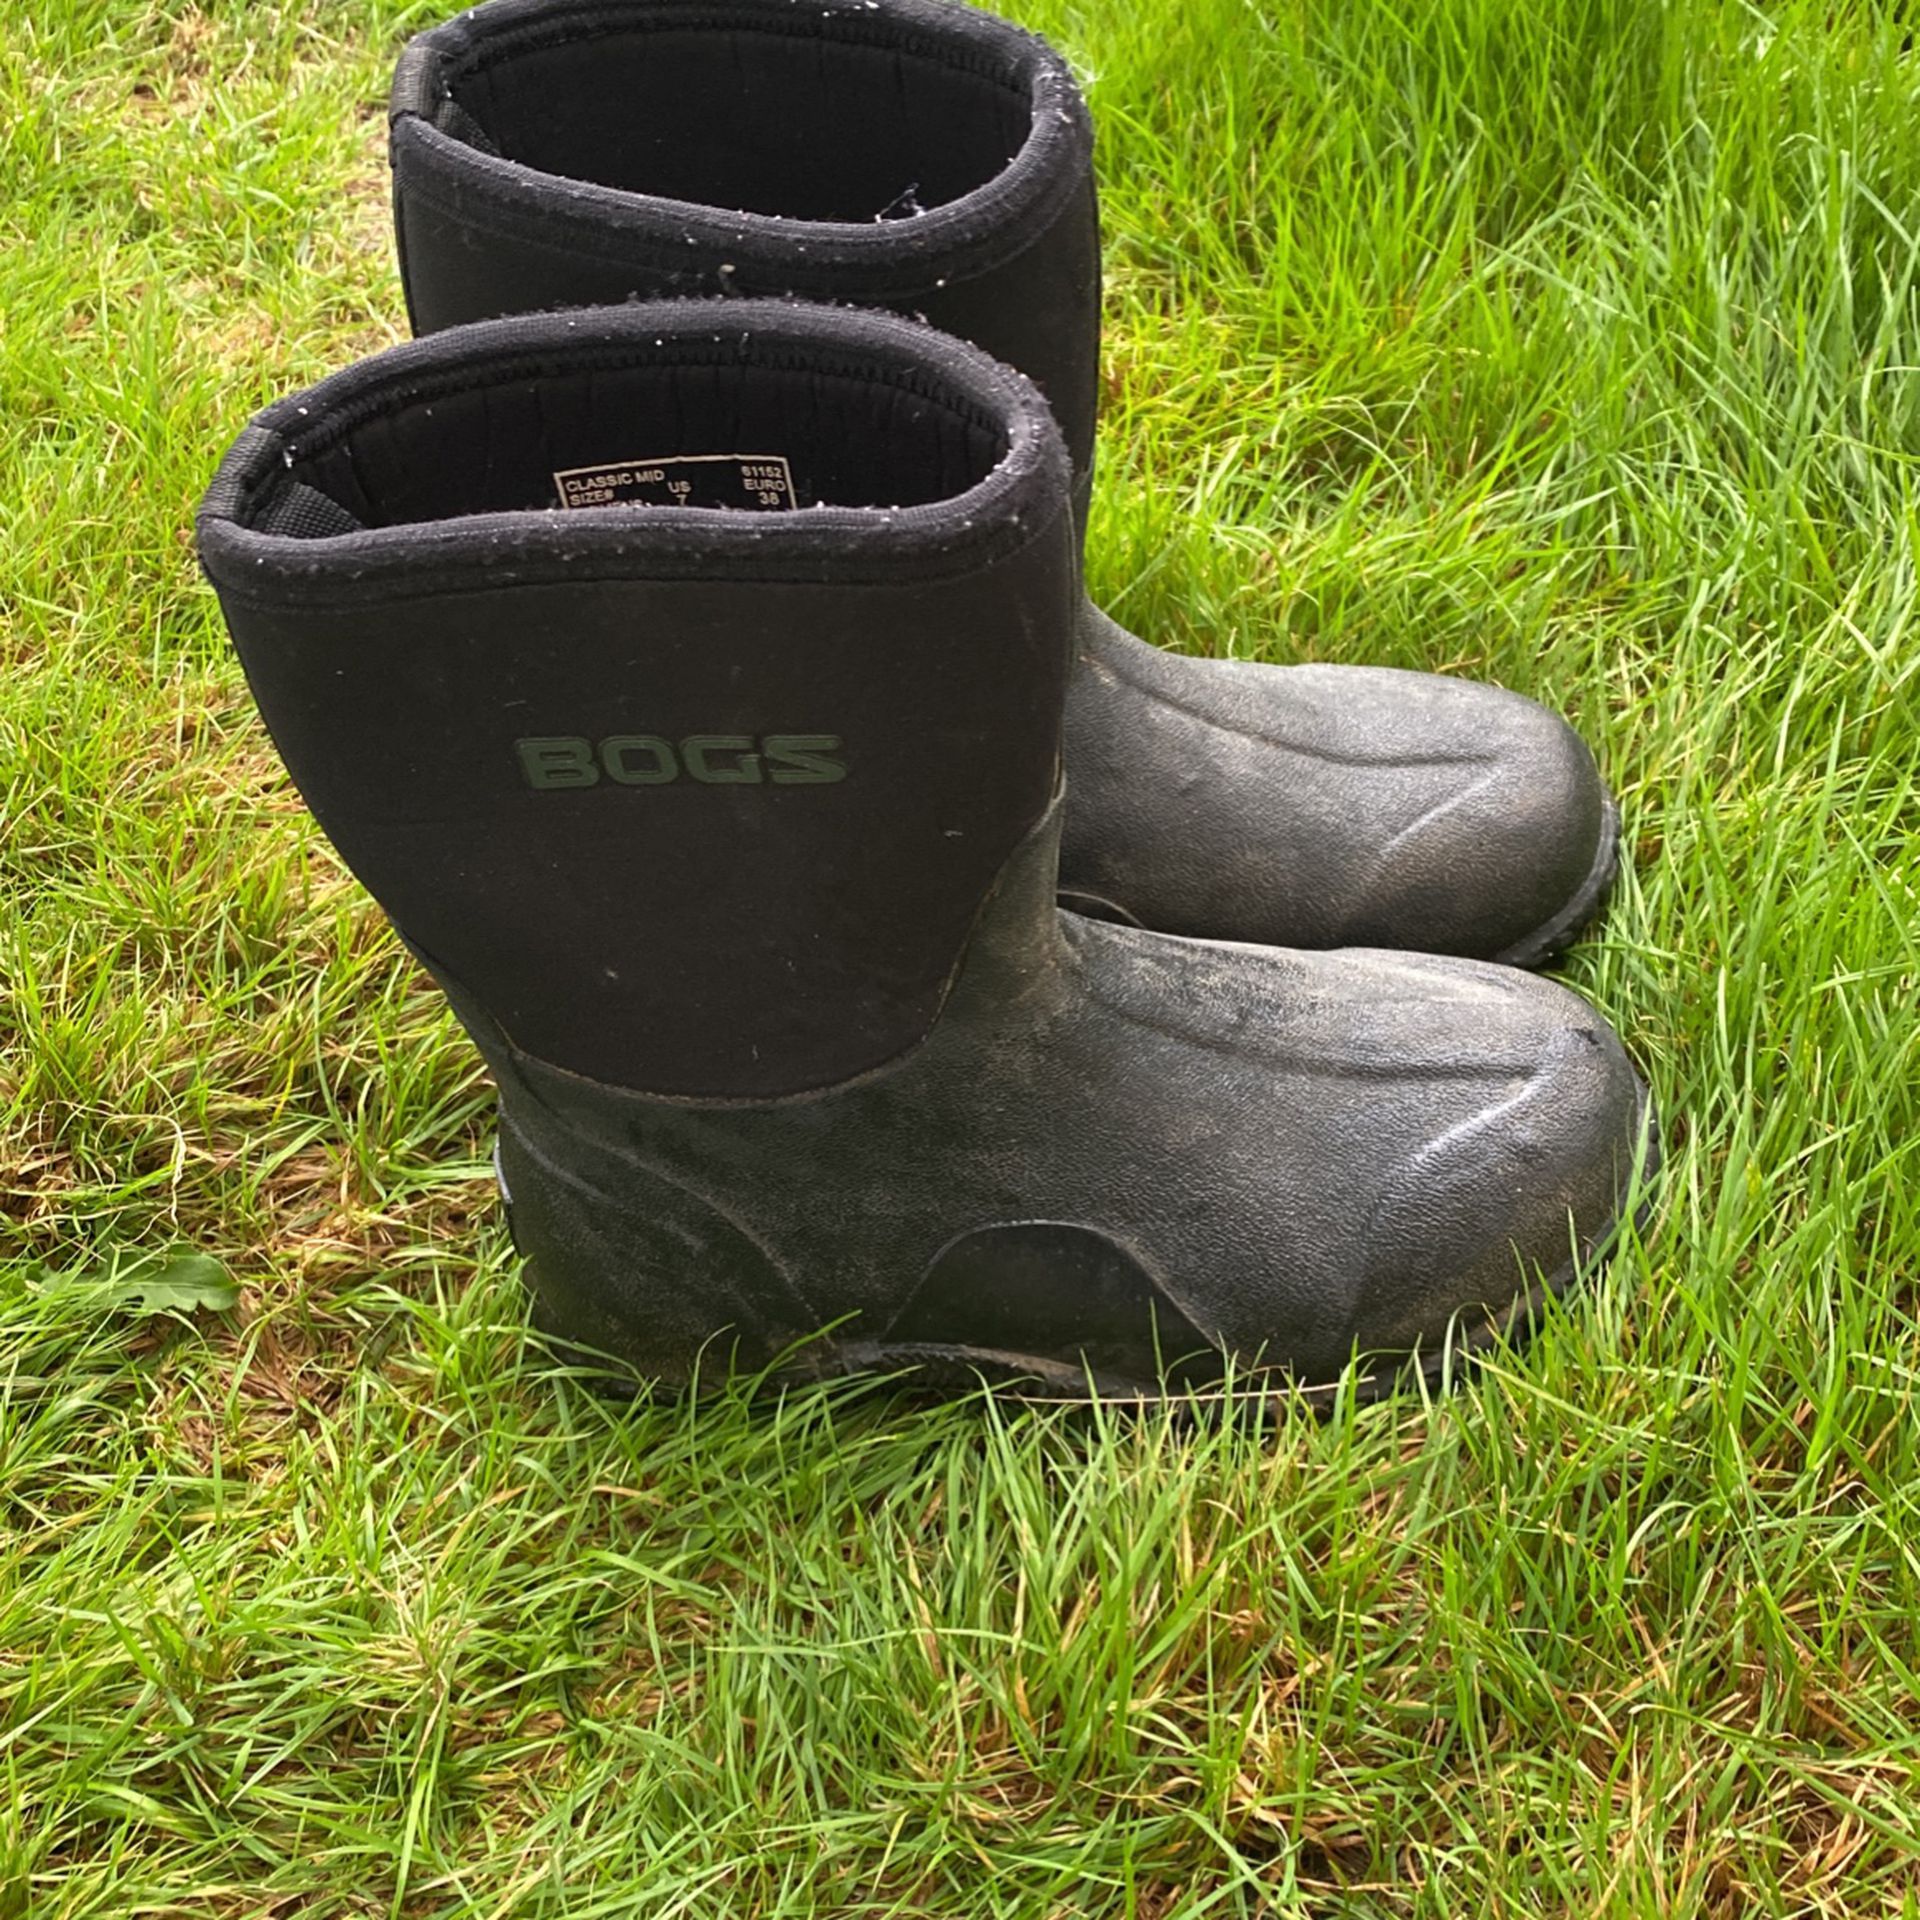 Bogs Boots For Women And Youth Size 7 Still Lots Of Life On It